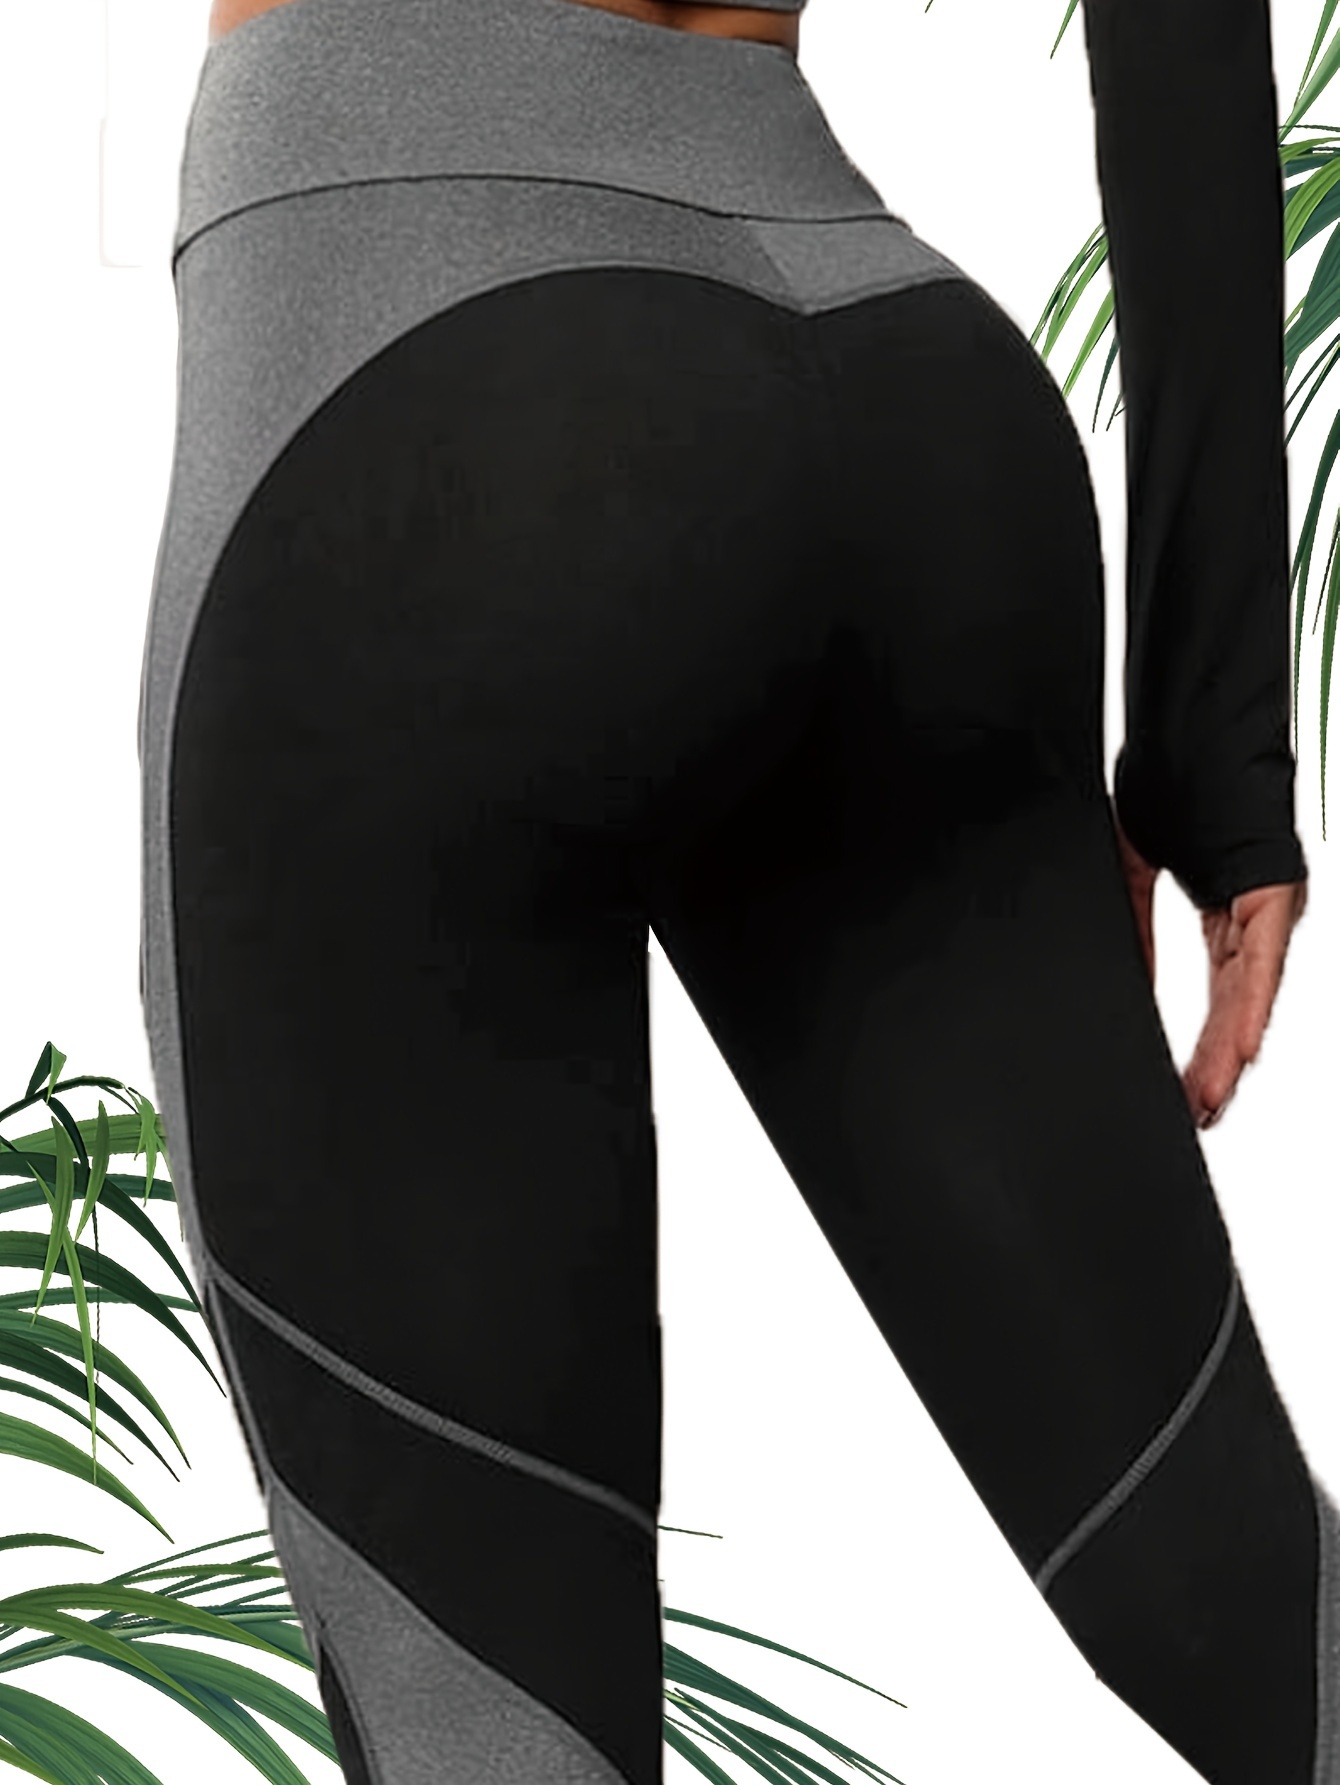  Leggings Pocket Sports Pants Yoga Women Workout Out Running  Athletic Fitness Yoga Pants Petite Yoga Pants for (Black, S) : Clothing,  Shoes & Jewelry